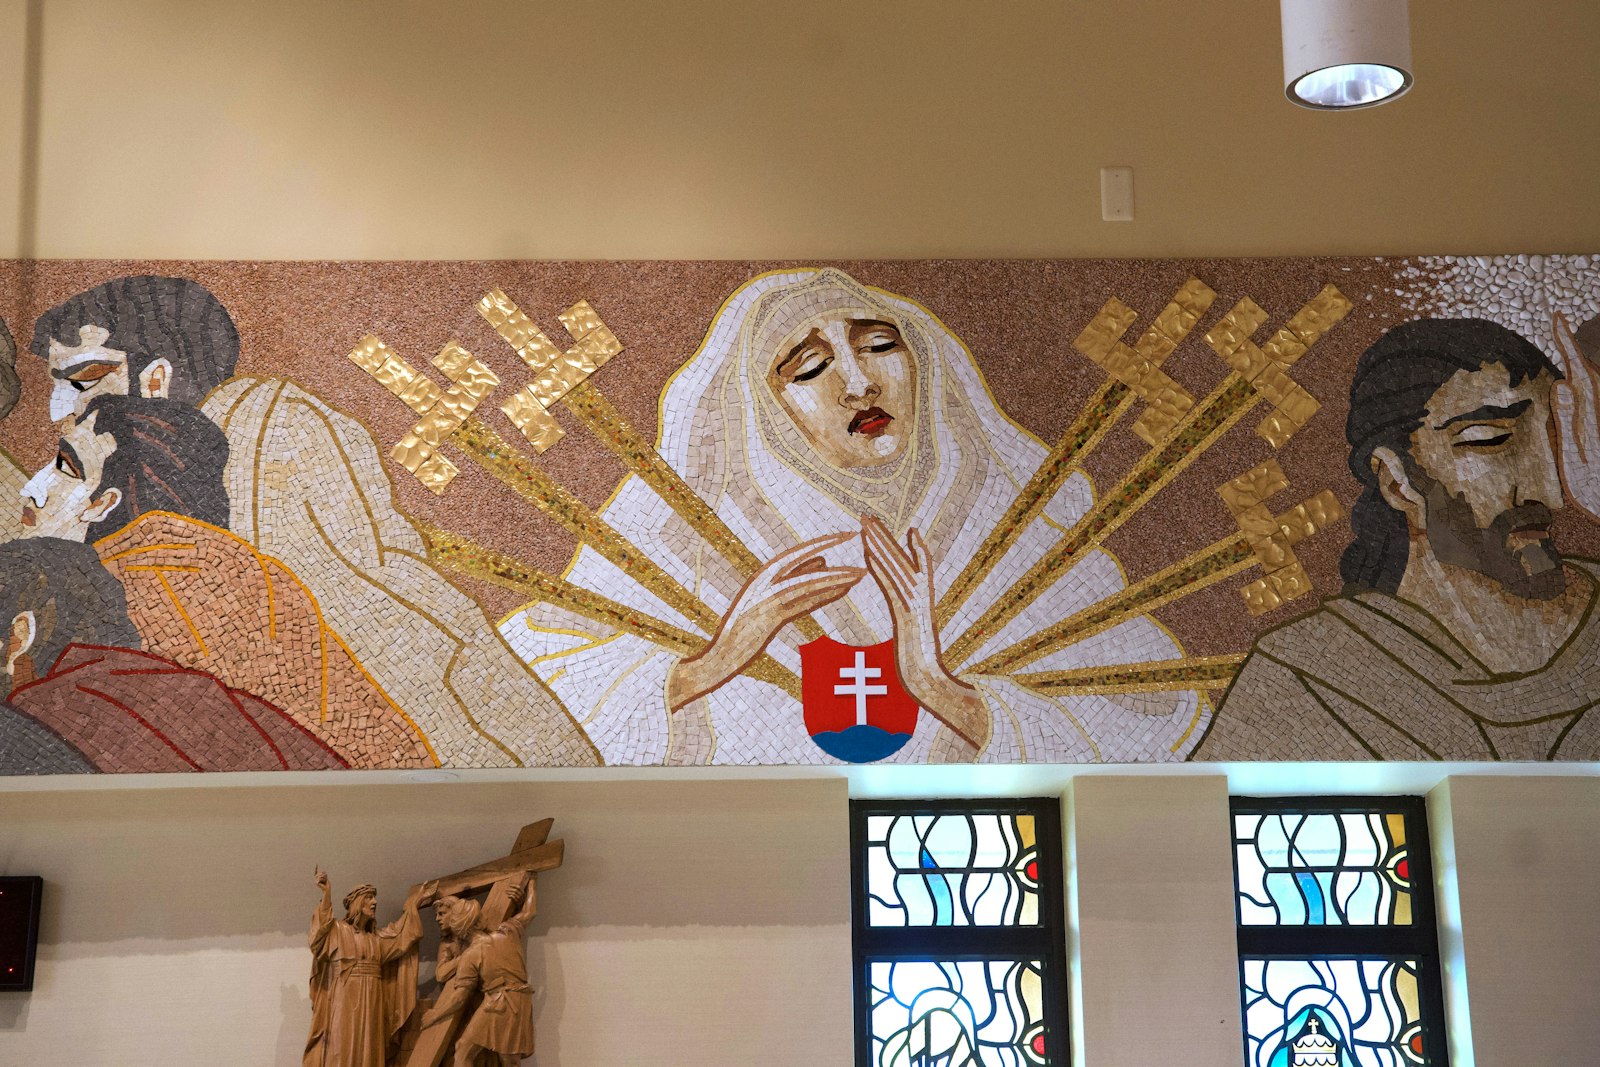 Fr. Drab chose to include an image of Our Lady of Sorrows, her heart pierced by seven swords. She is also wearing the Slovak flag.